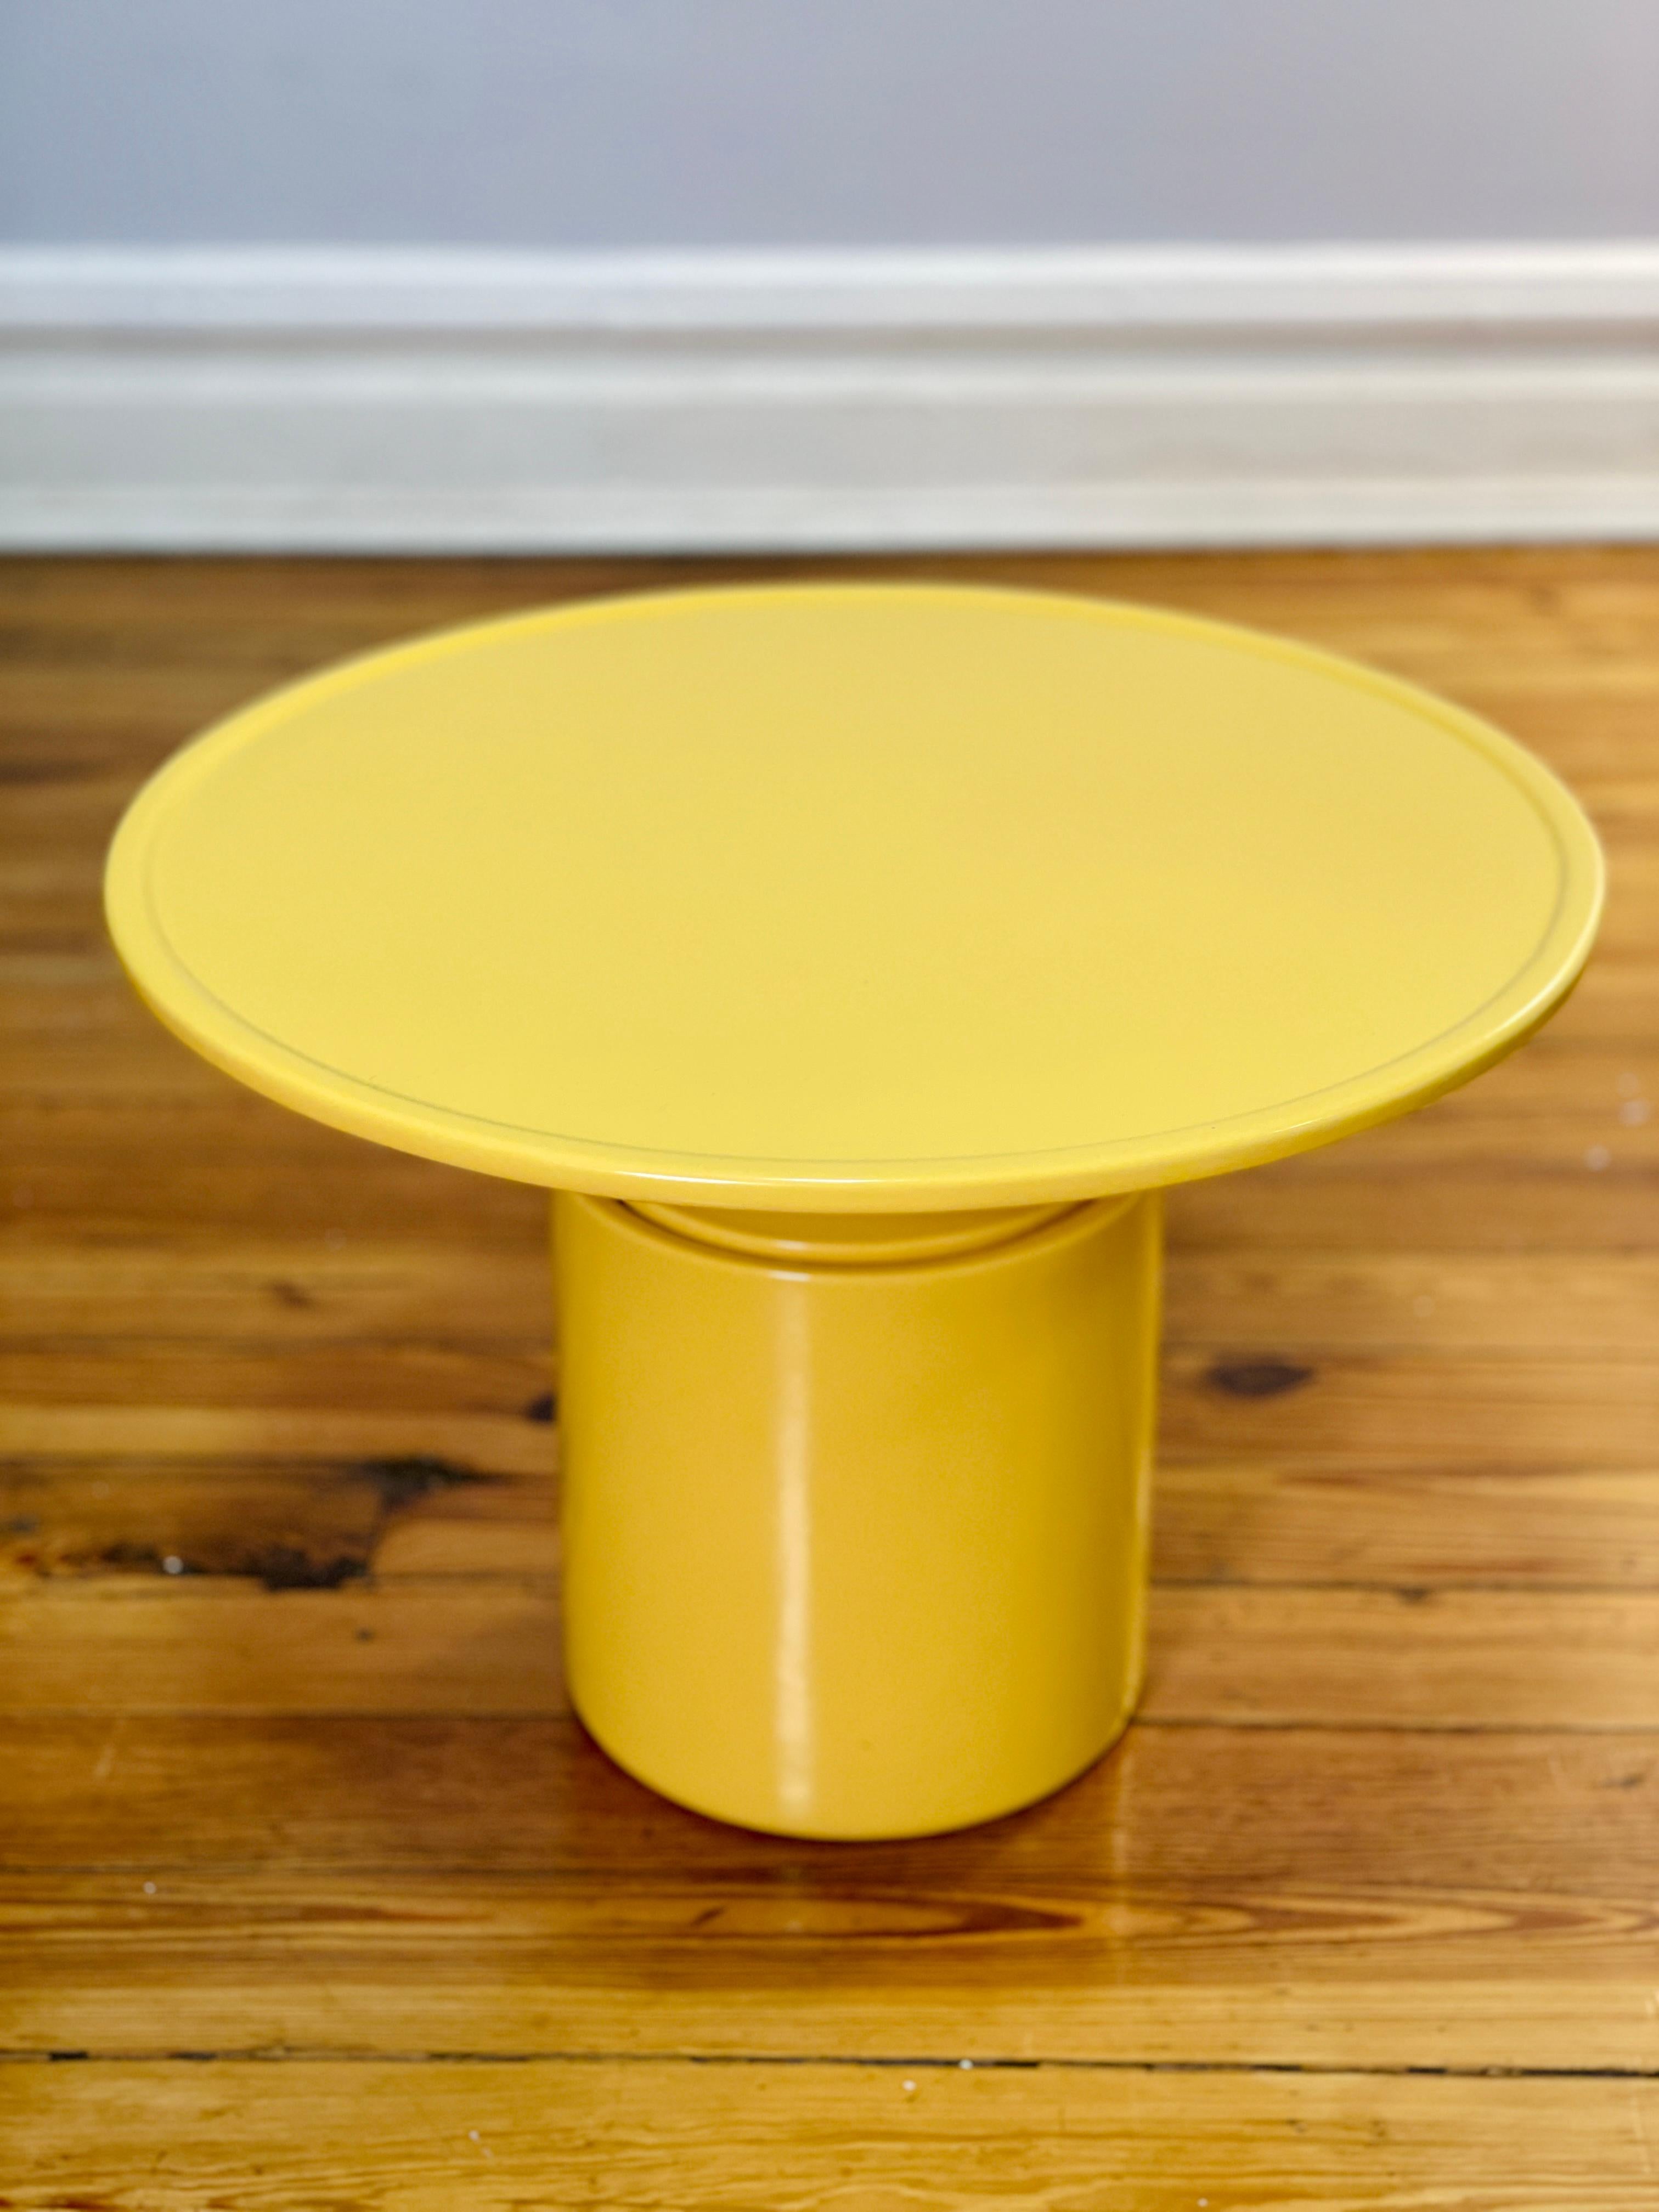 This contemporary side table is part of the Delcourt Collection. Edition by Christophe Delcourt and design by Vincent Dupont-Rougier.  Made in ceramic and beautifully glazed with a vibrant yellow tone. This is the smaller model of the OUK side